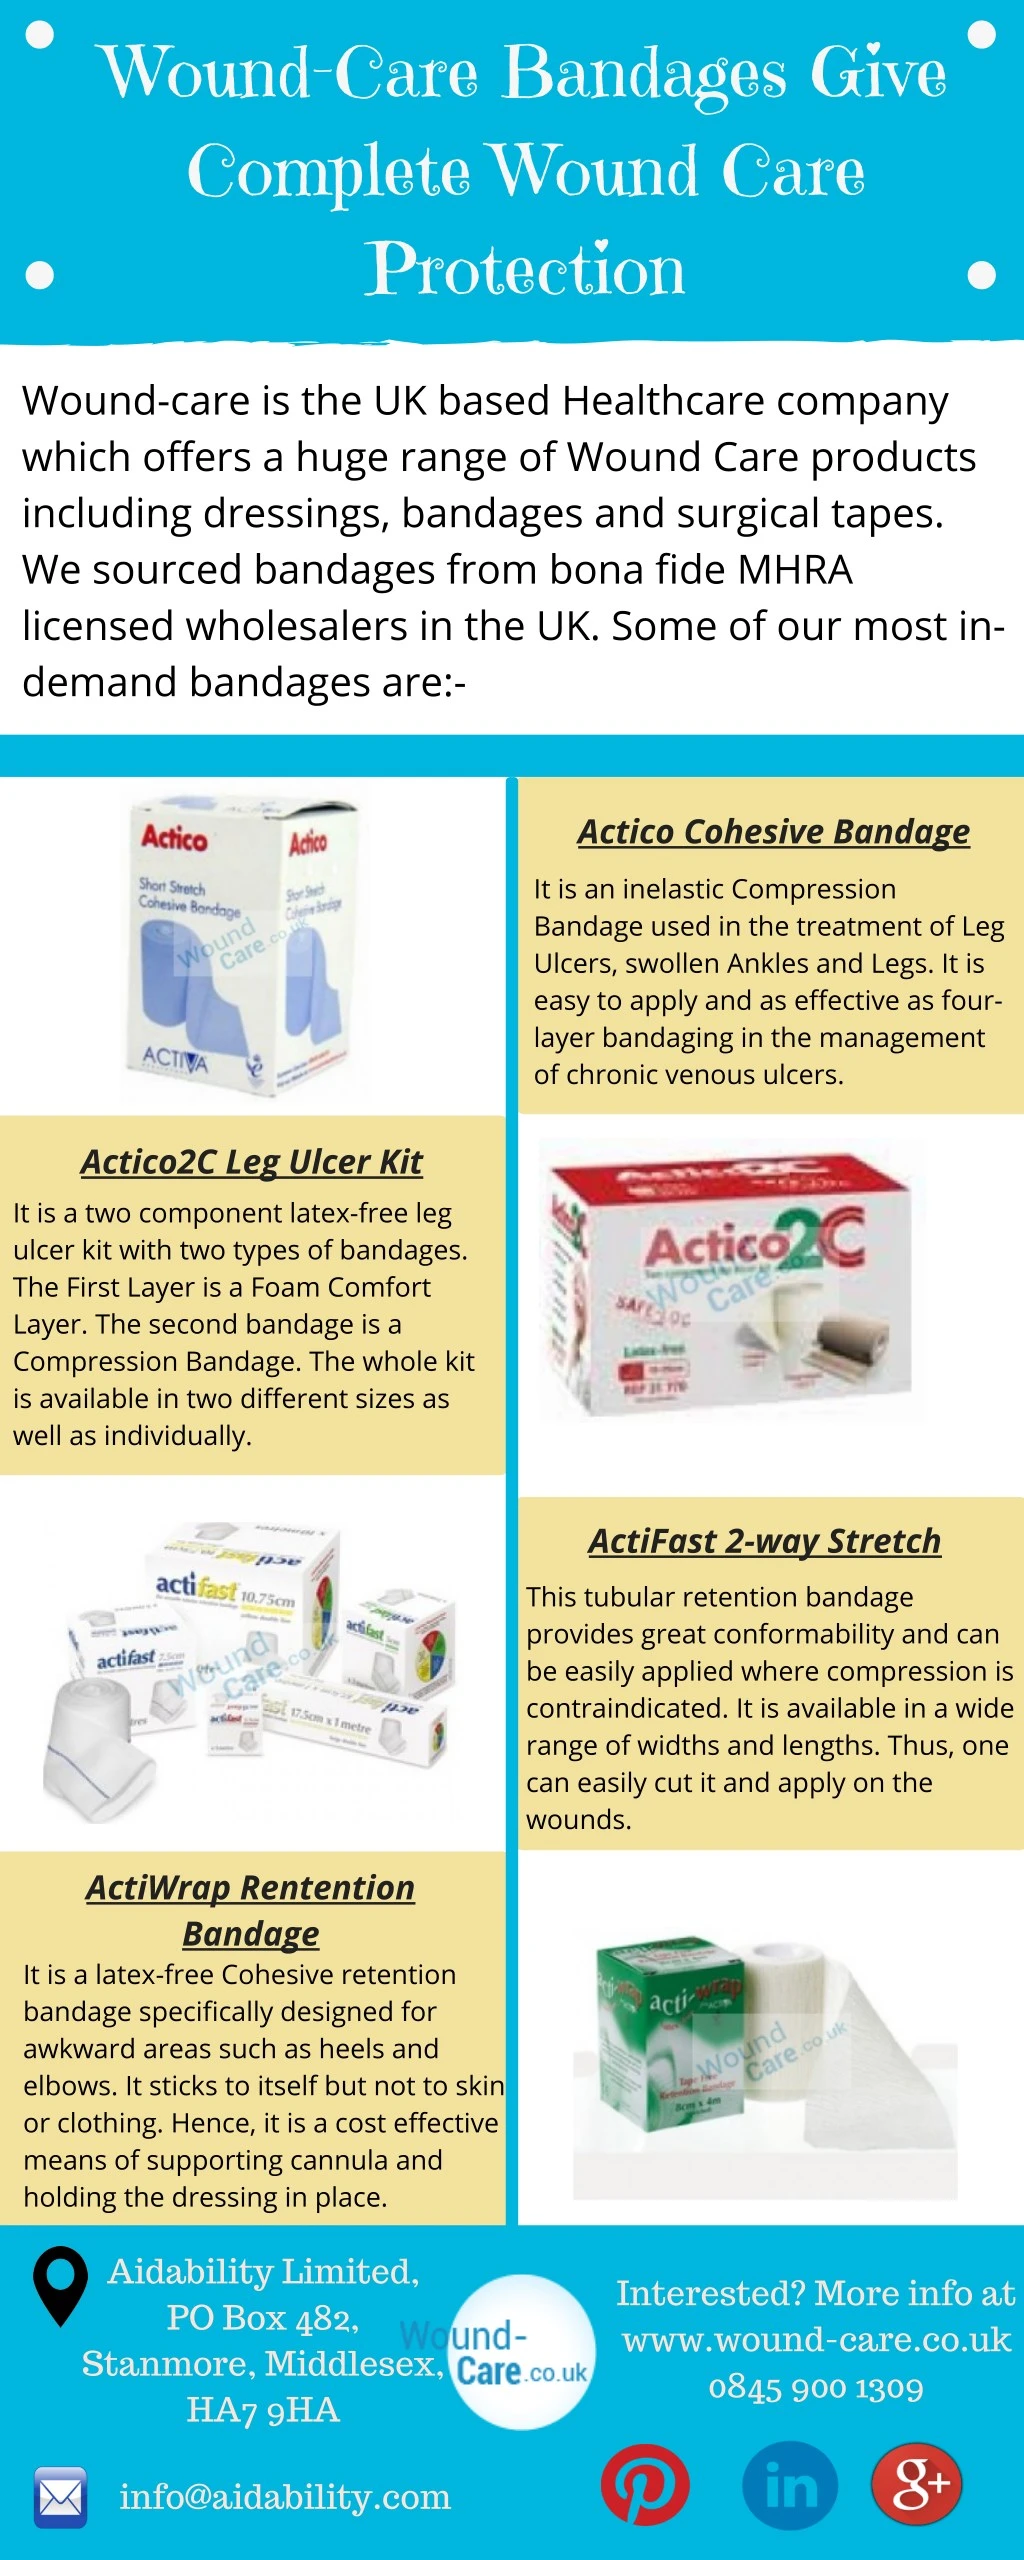 wound care bandages give complete wound care